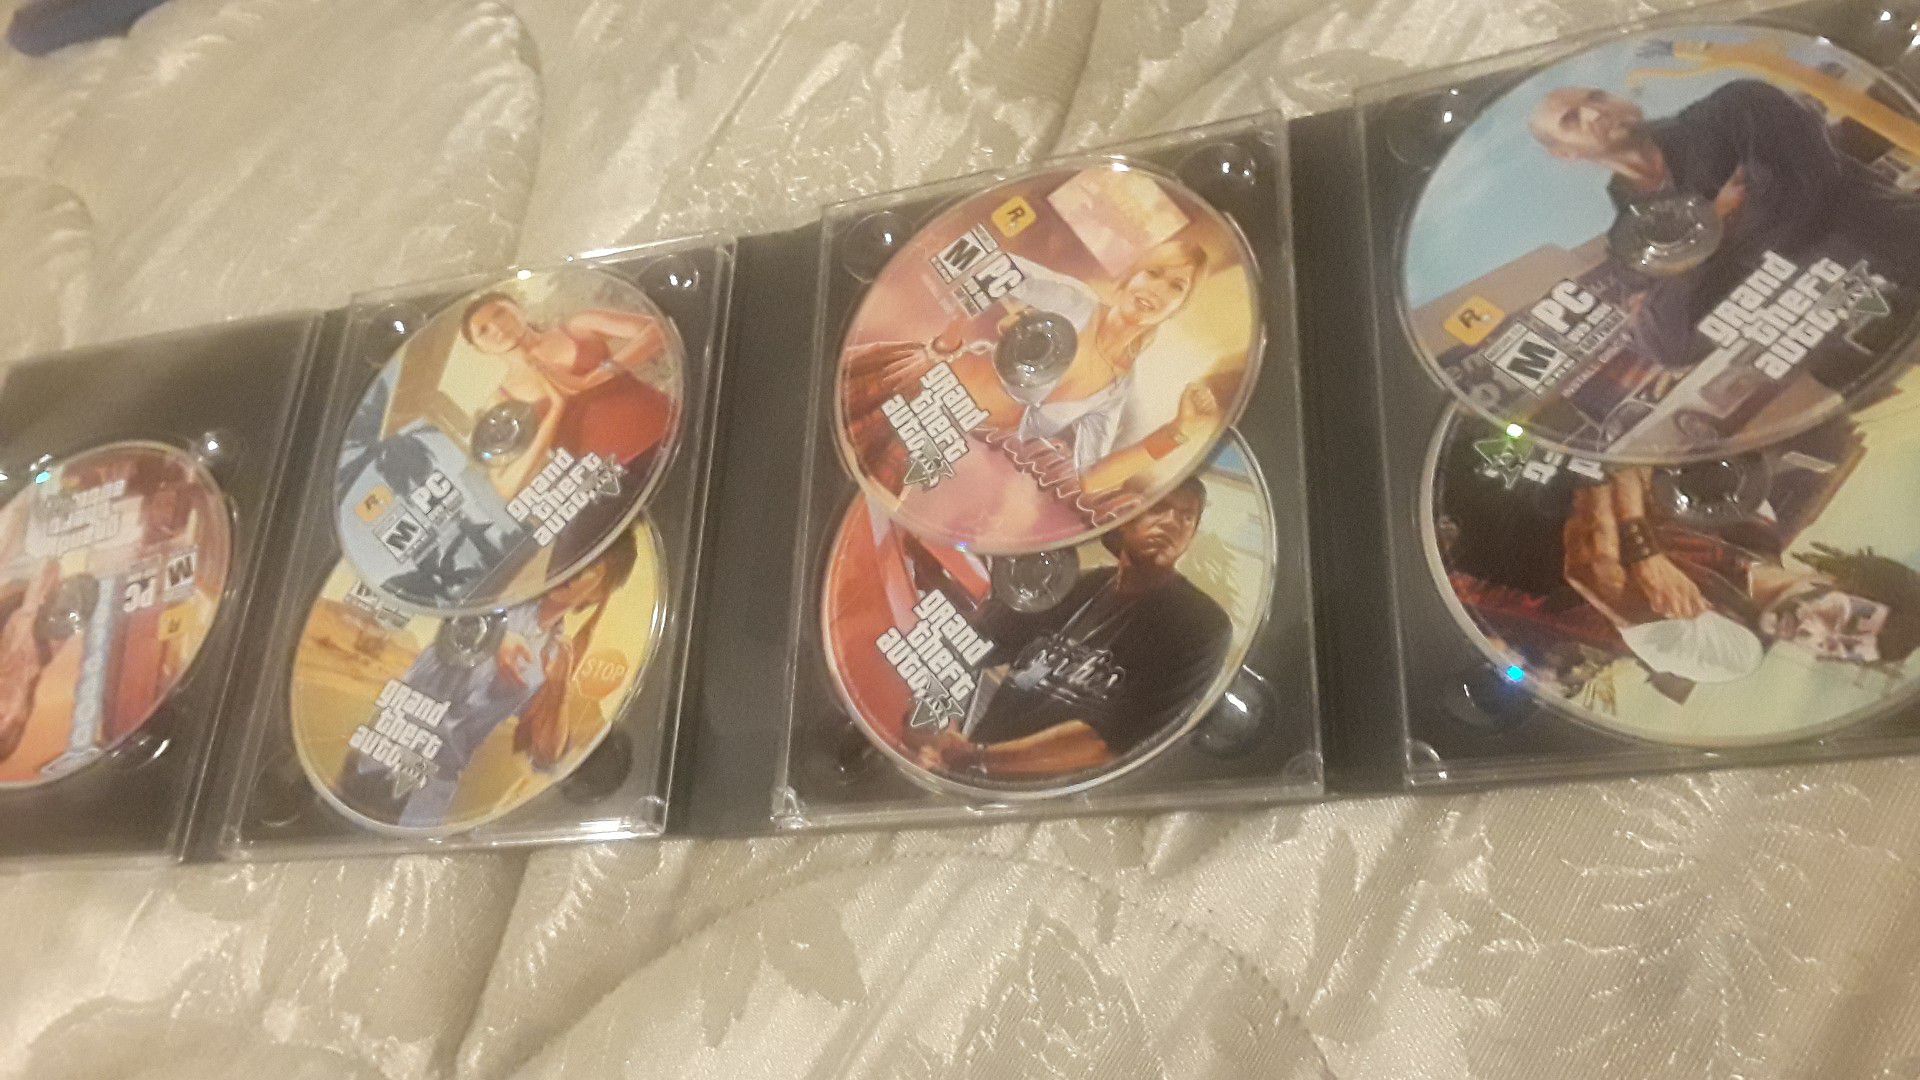 GTA5 for the PC